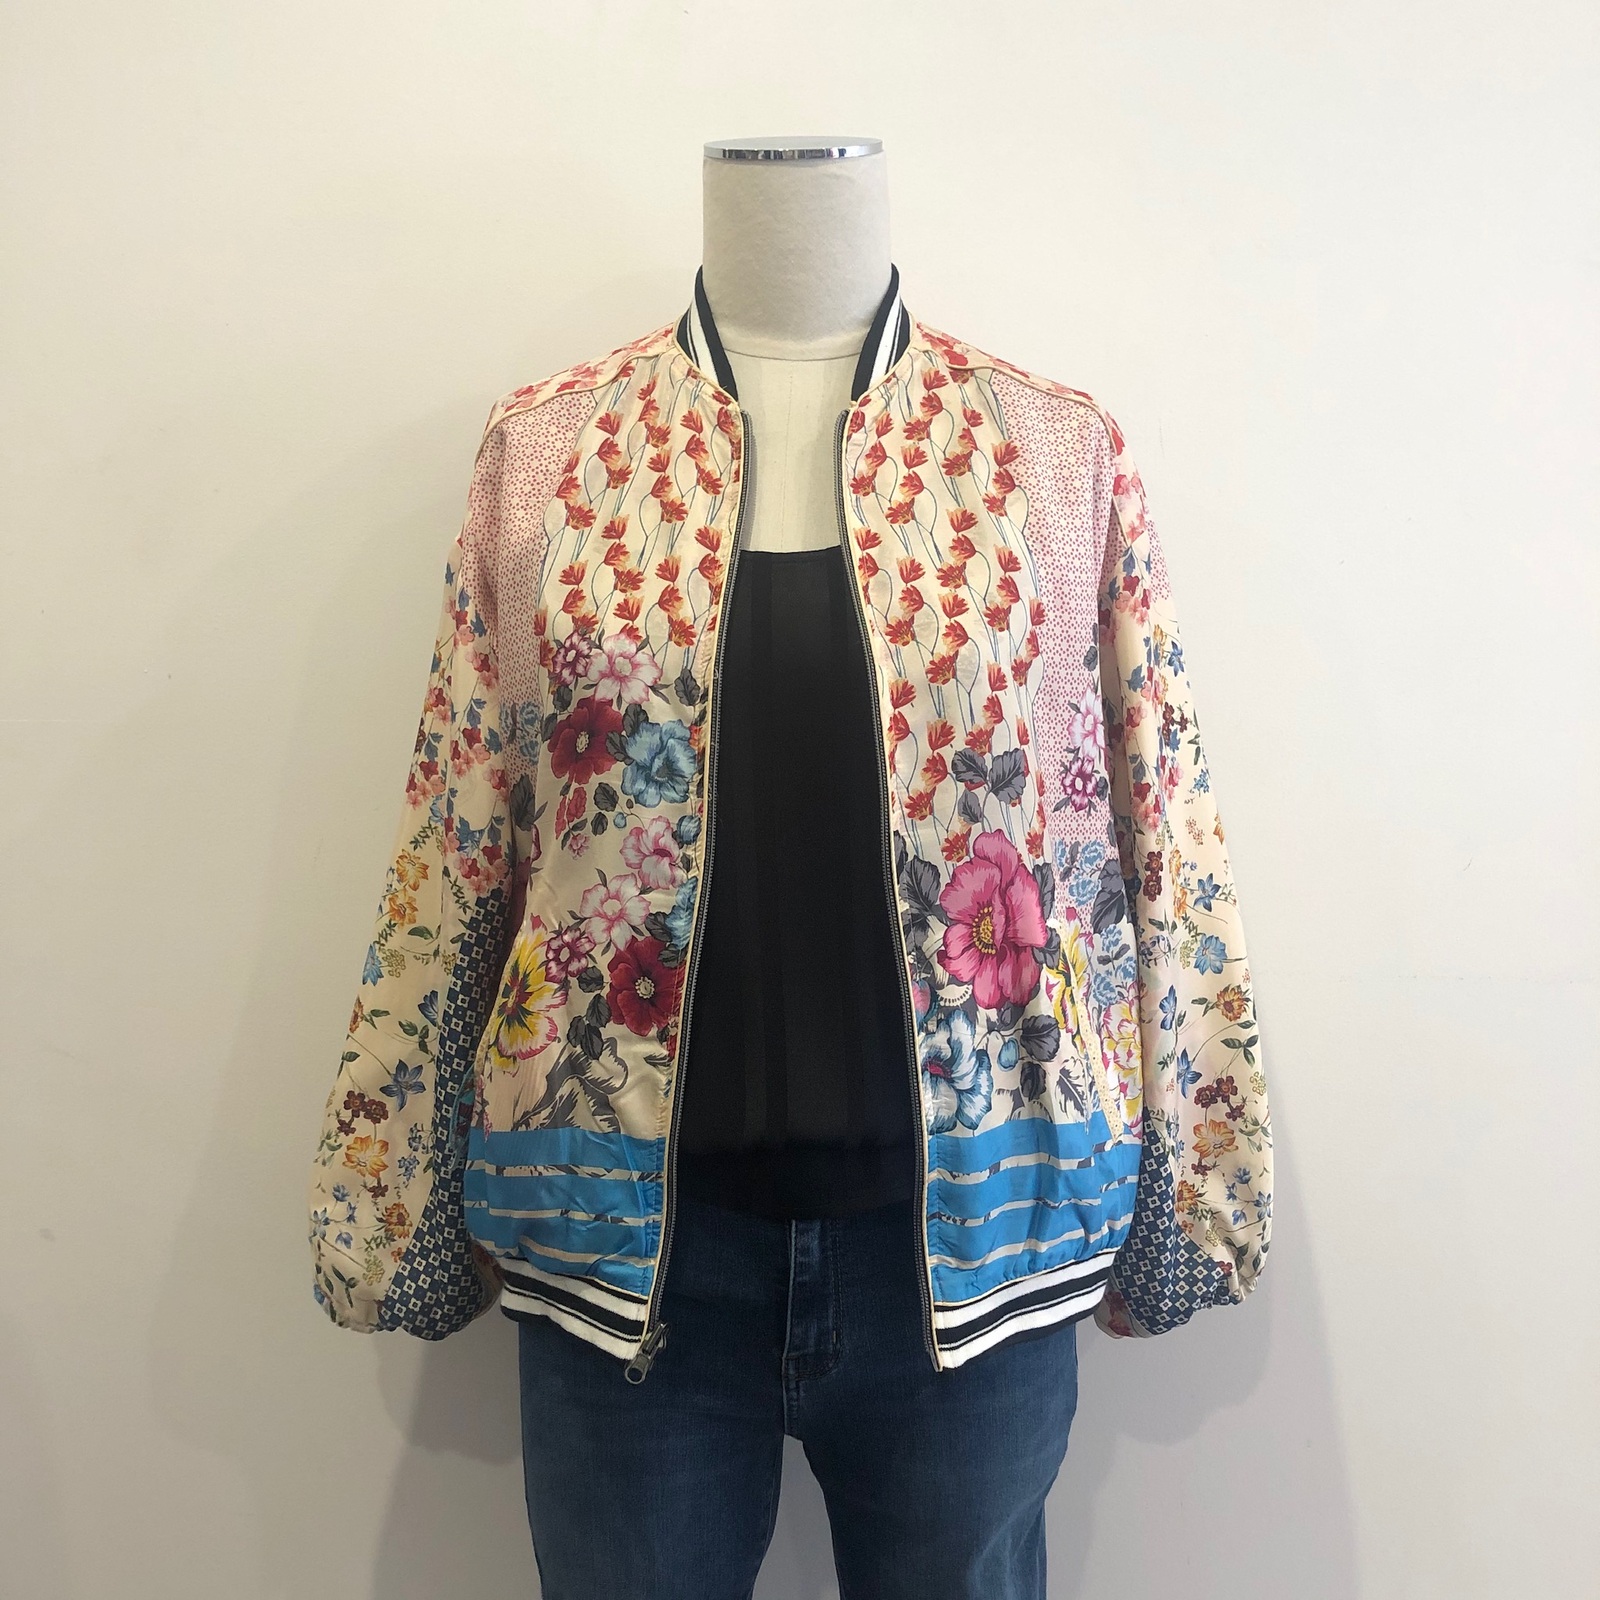 Quirkee Birds - Johnny Was Reversible Silk Bomber Jacket